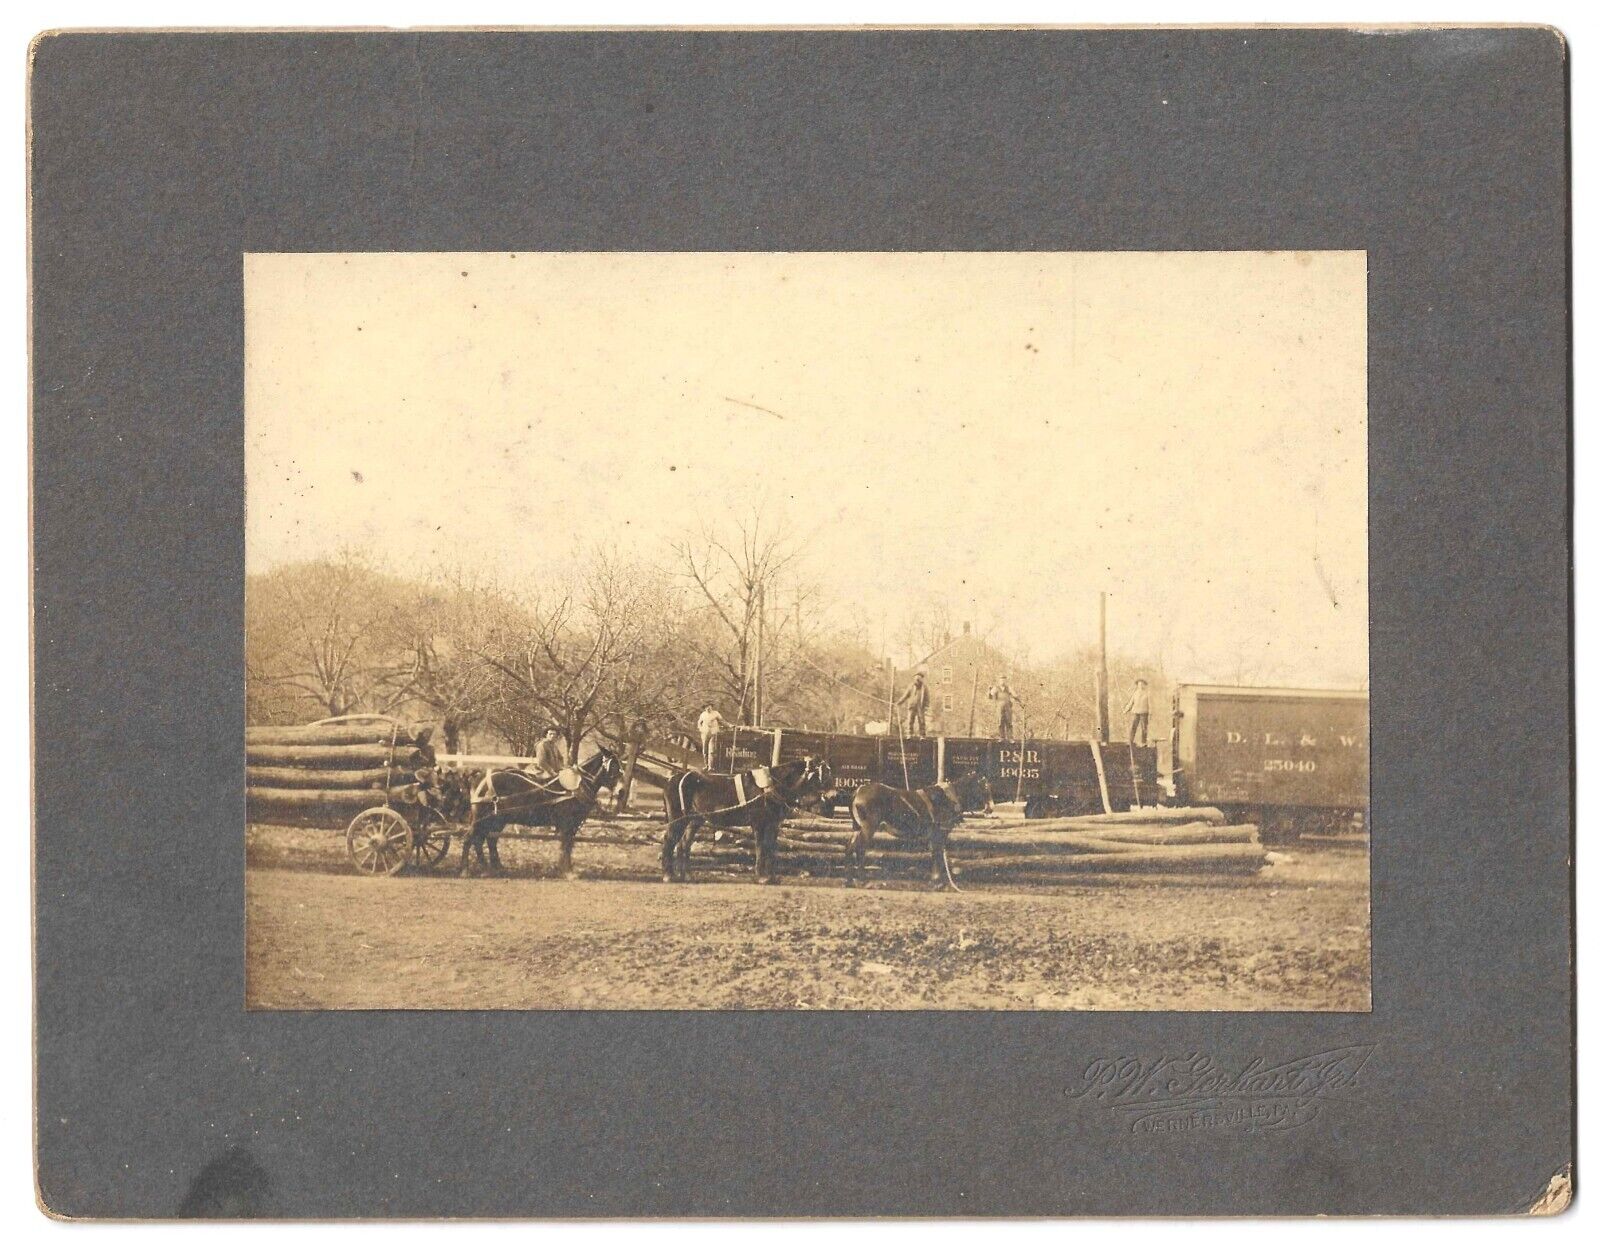 Old Cabinet Photo Loading Logs On P & R and D L & W Train Cars Wernersville, PA